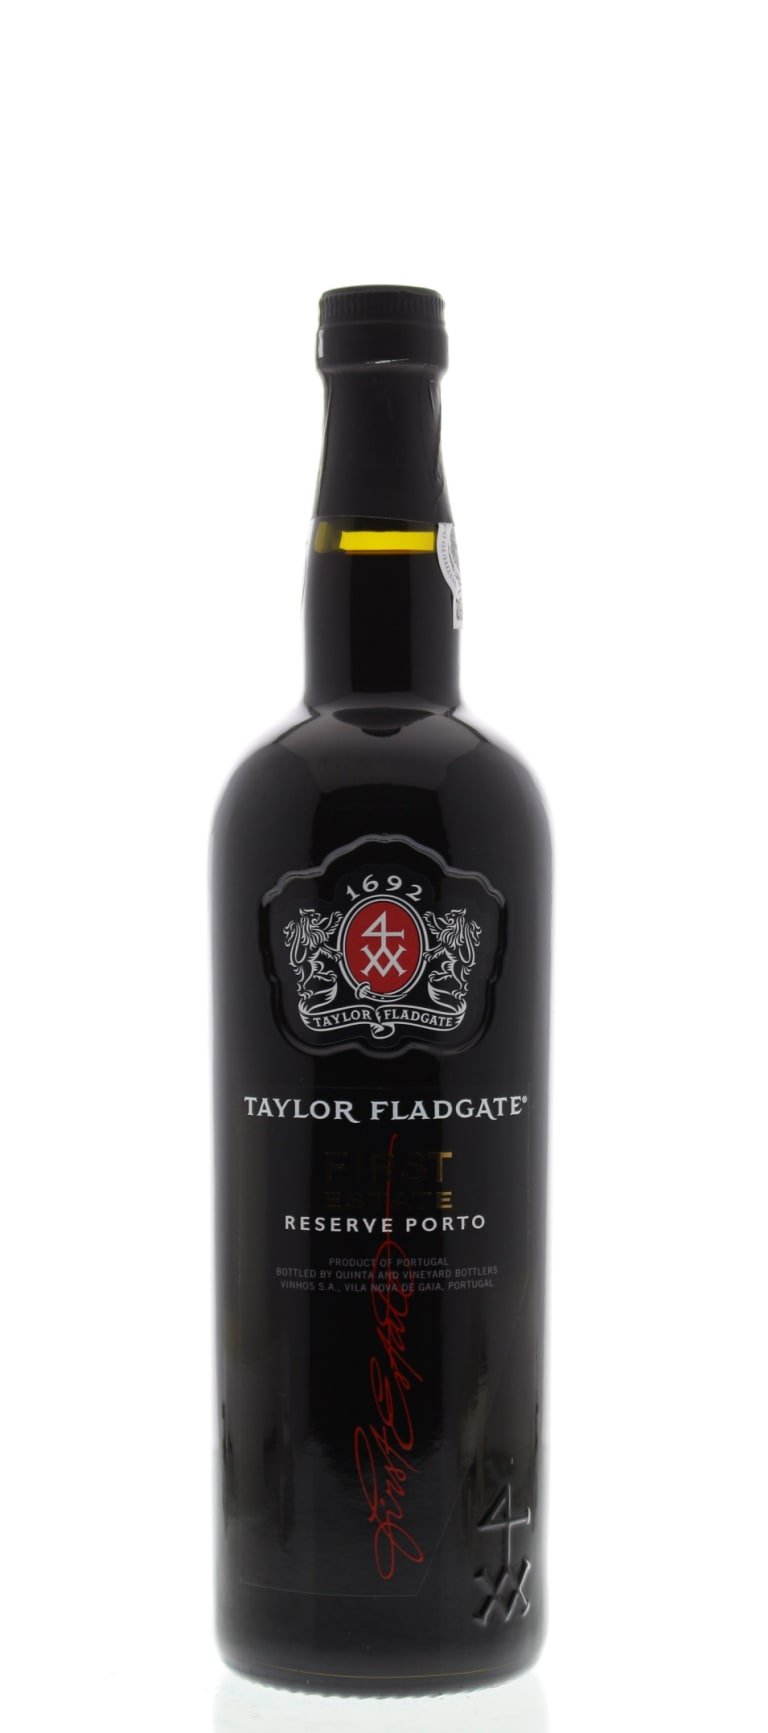 Taylor Port Alcohol Content: Savoring the Strength